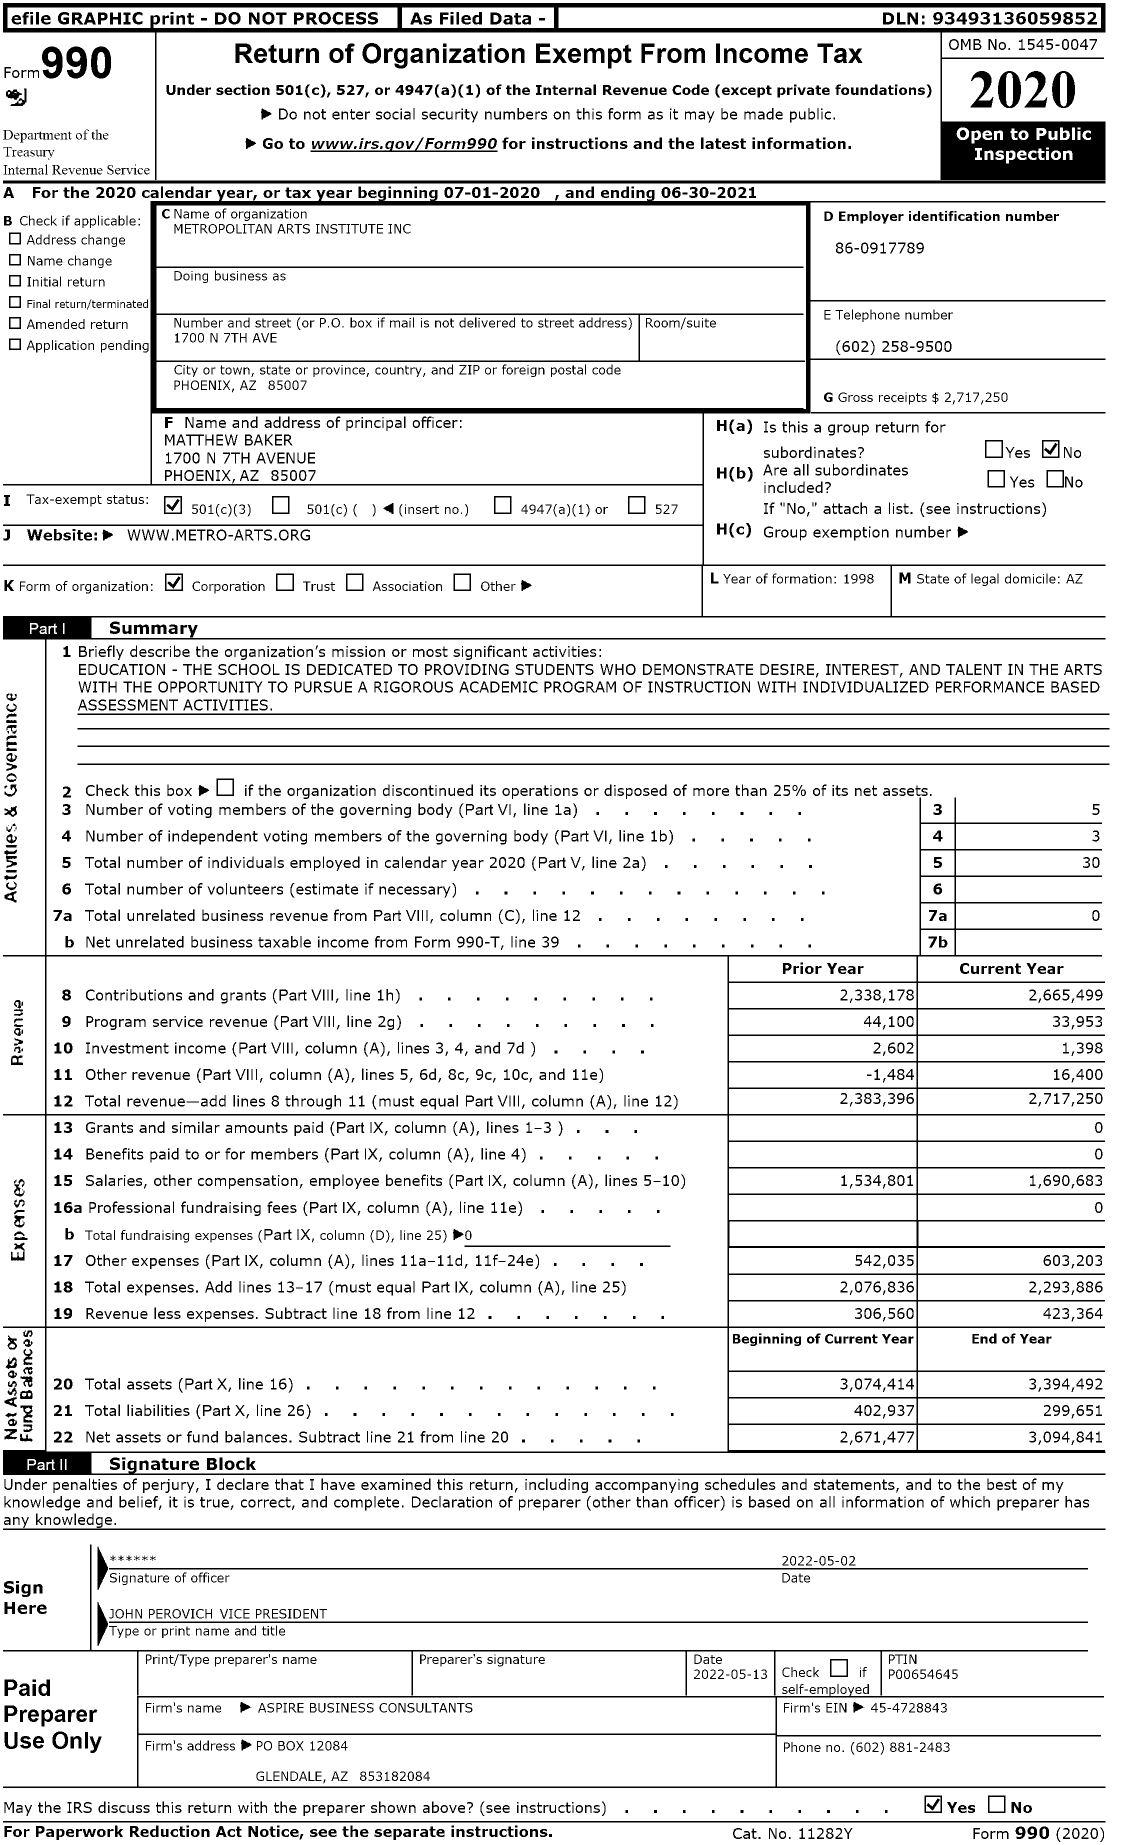 Image of first page of 2020 Form 990 for Metropolitan Arts Institute (MAI)